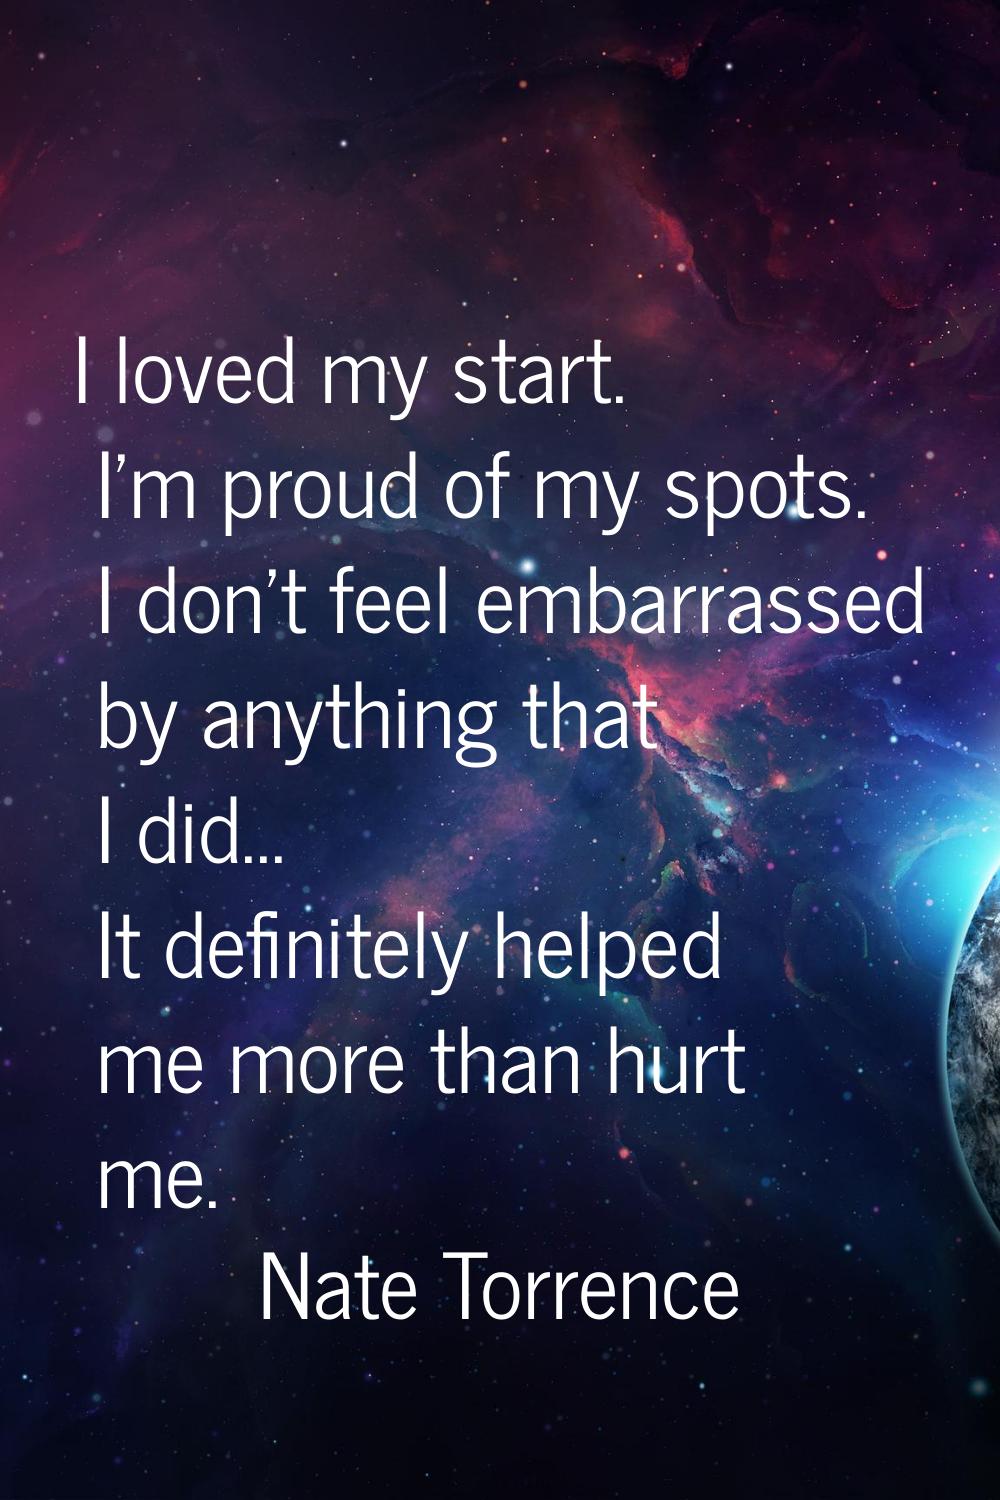 I loved my start. I'm proud of my spots. I don't feel embarrassed by anything that I did... It defi